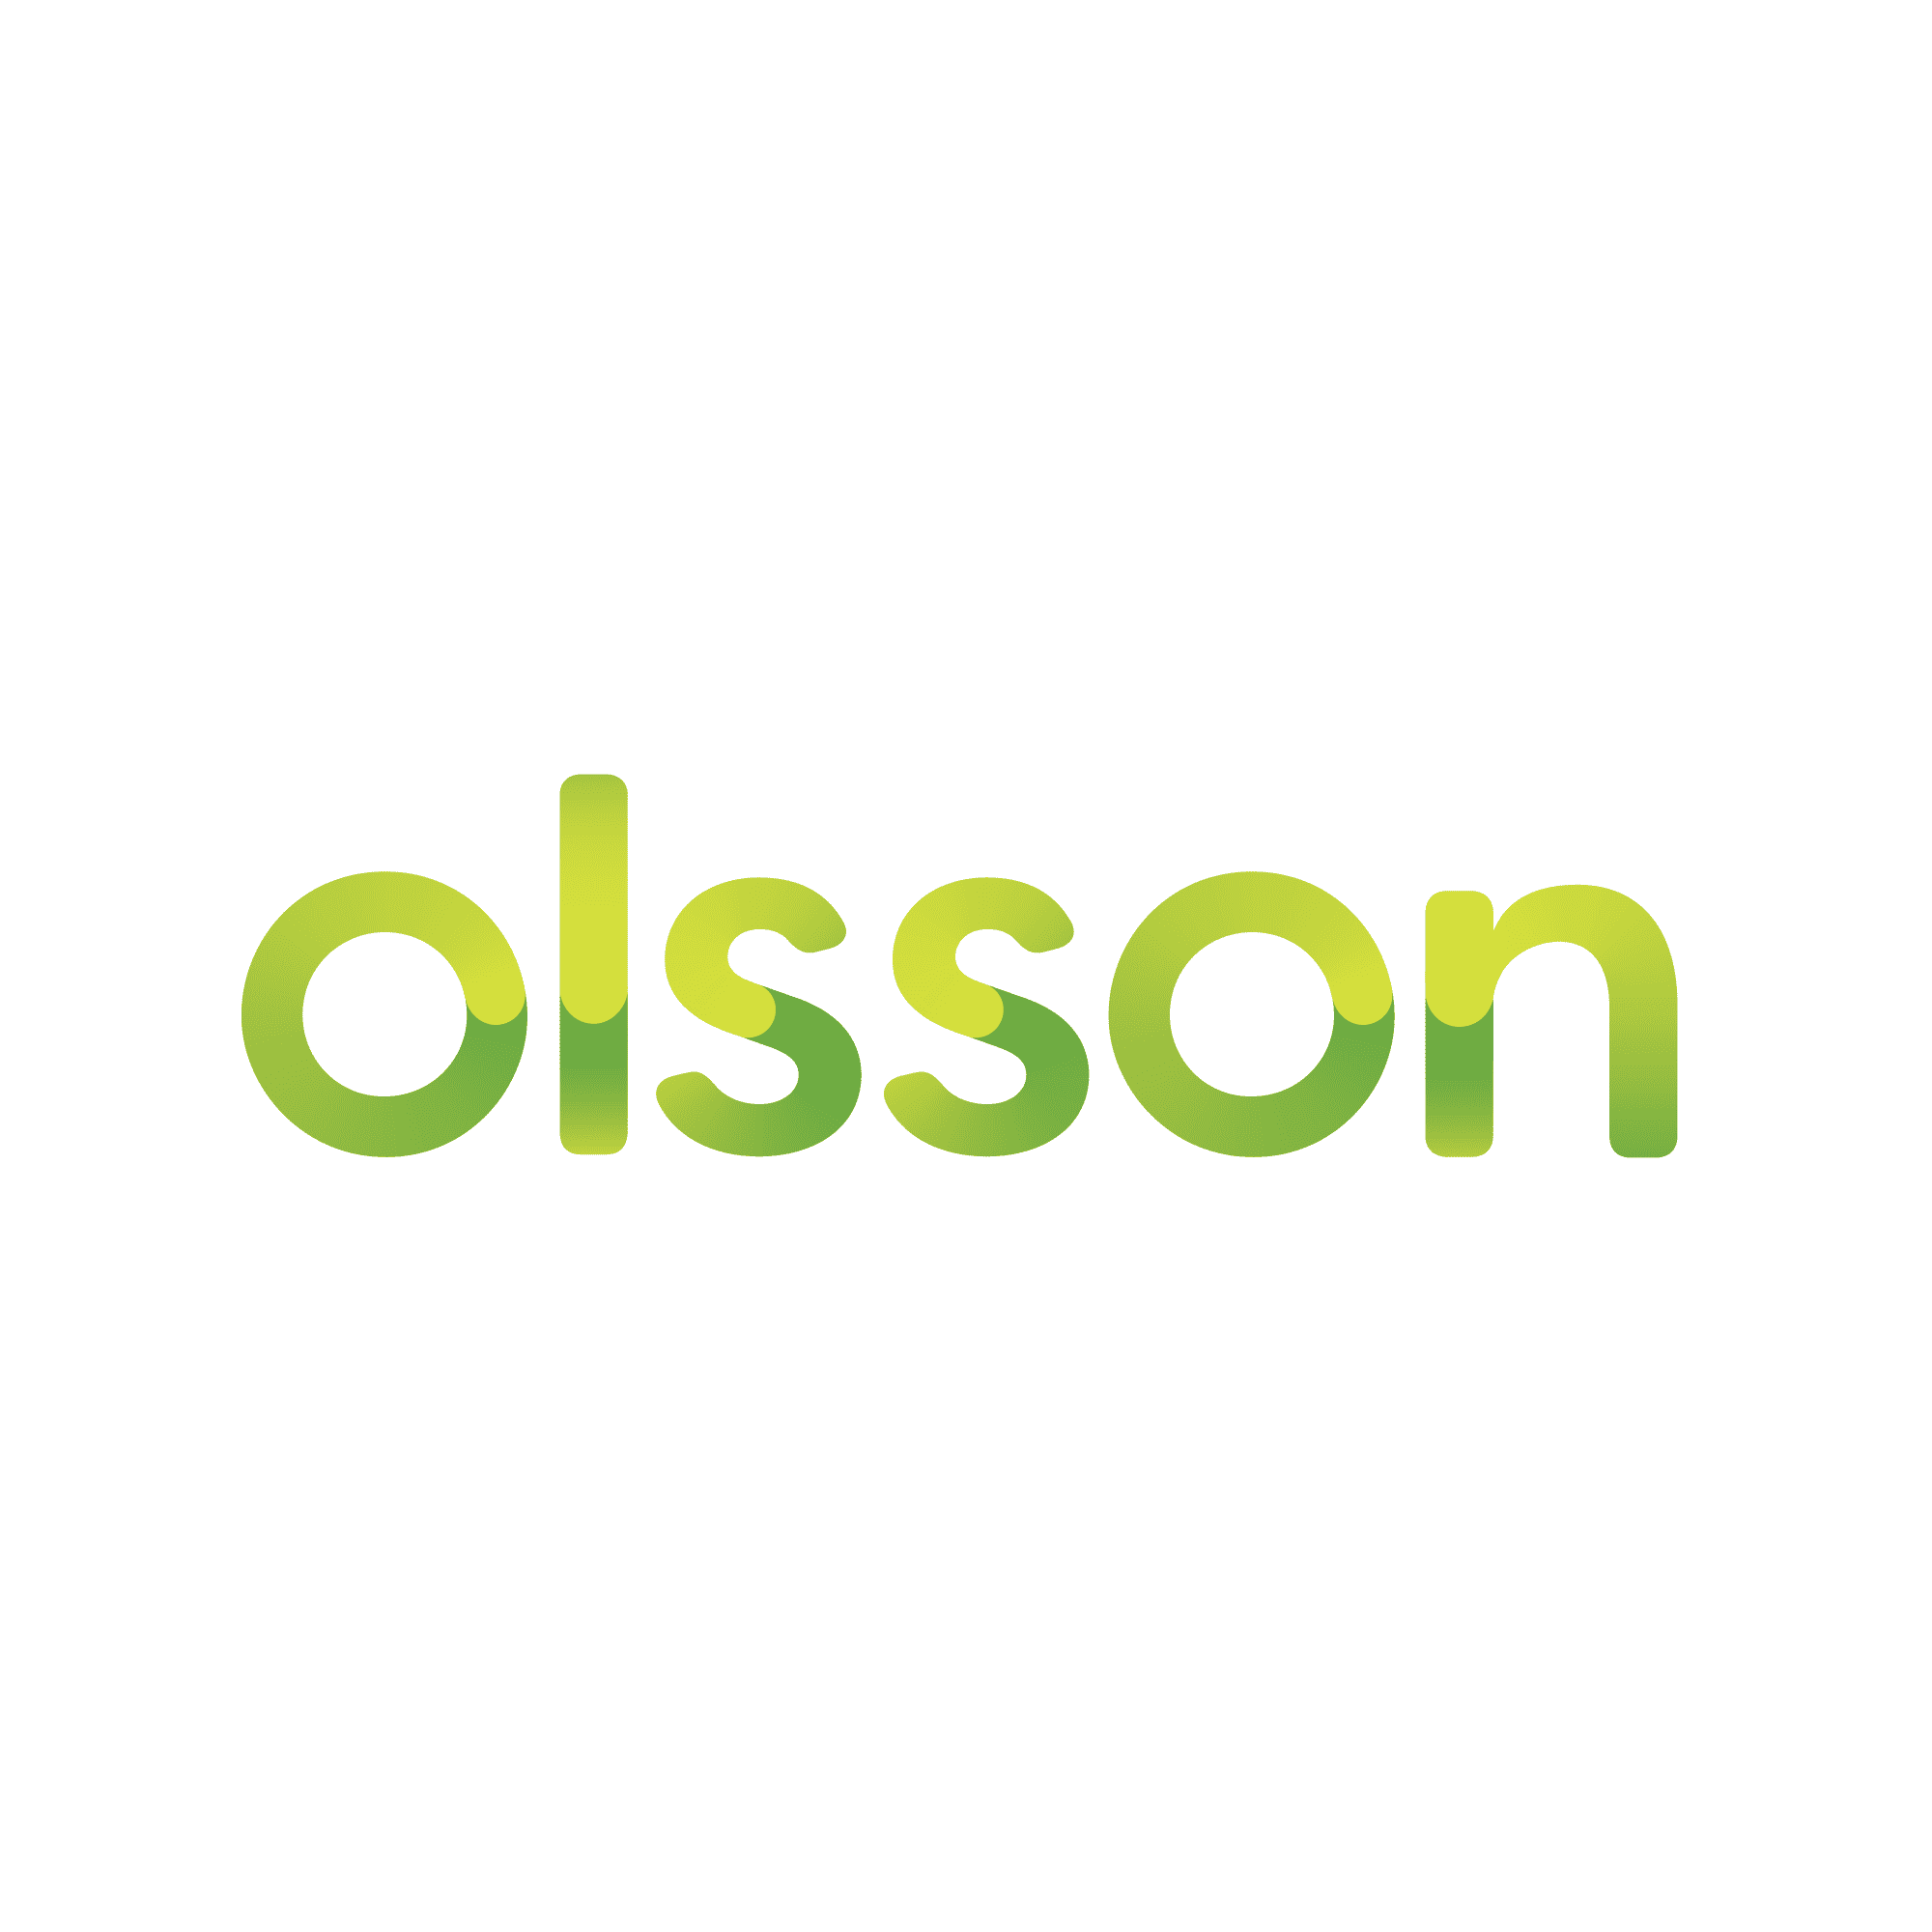 A green logo with the word olson on it.